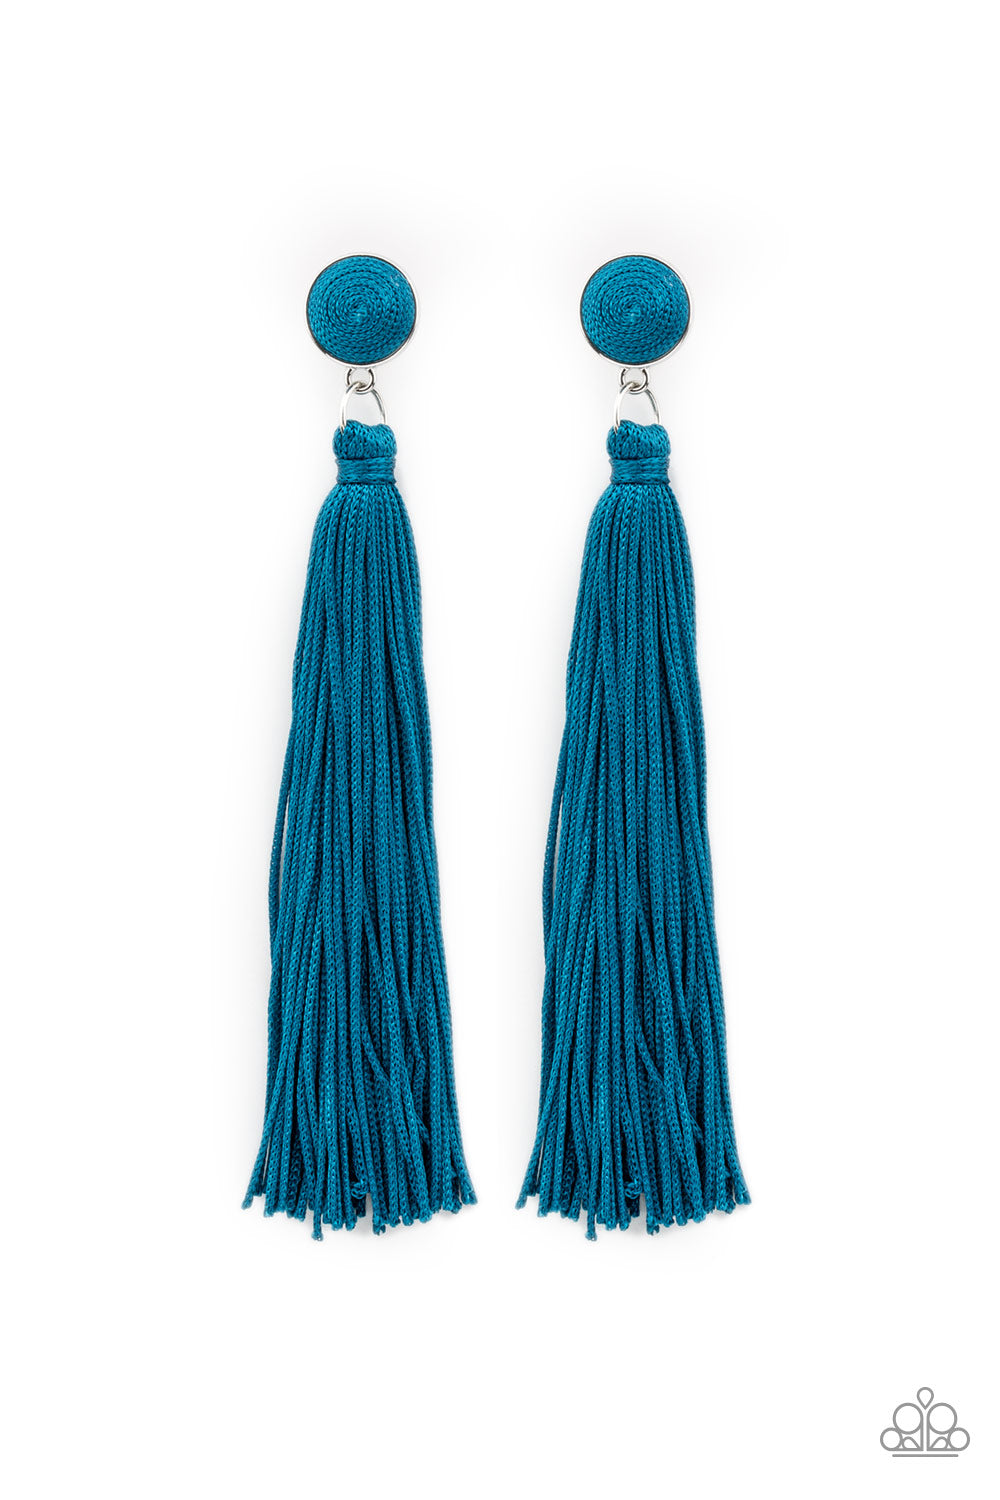 Tight rope Tassle-blue - VJ Bedazzled Jewelry